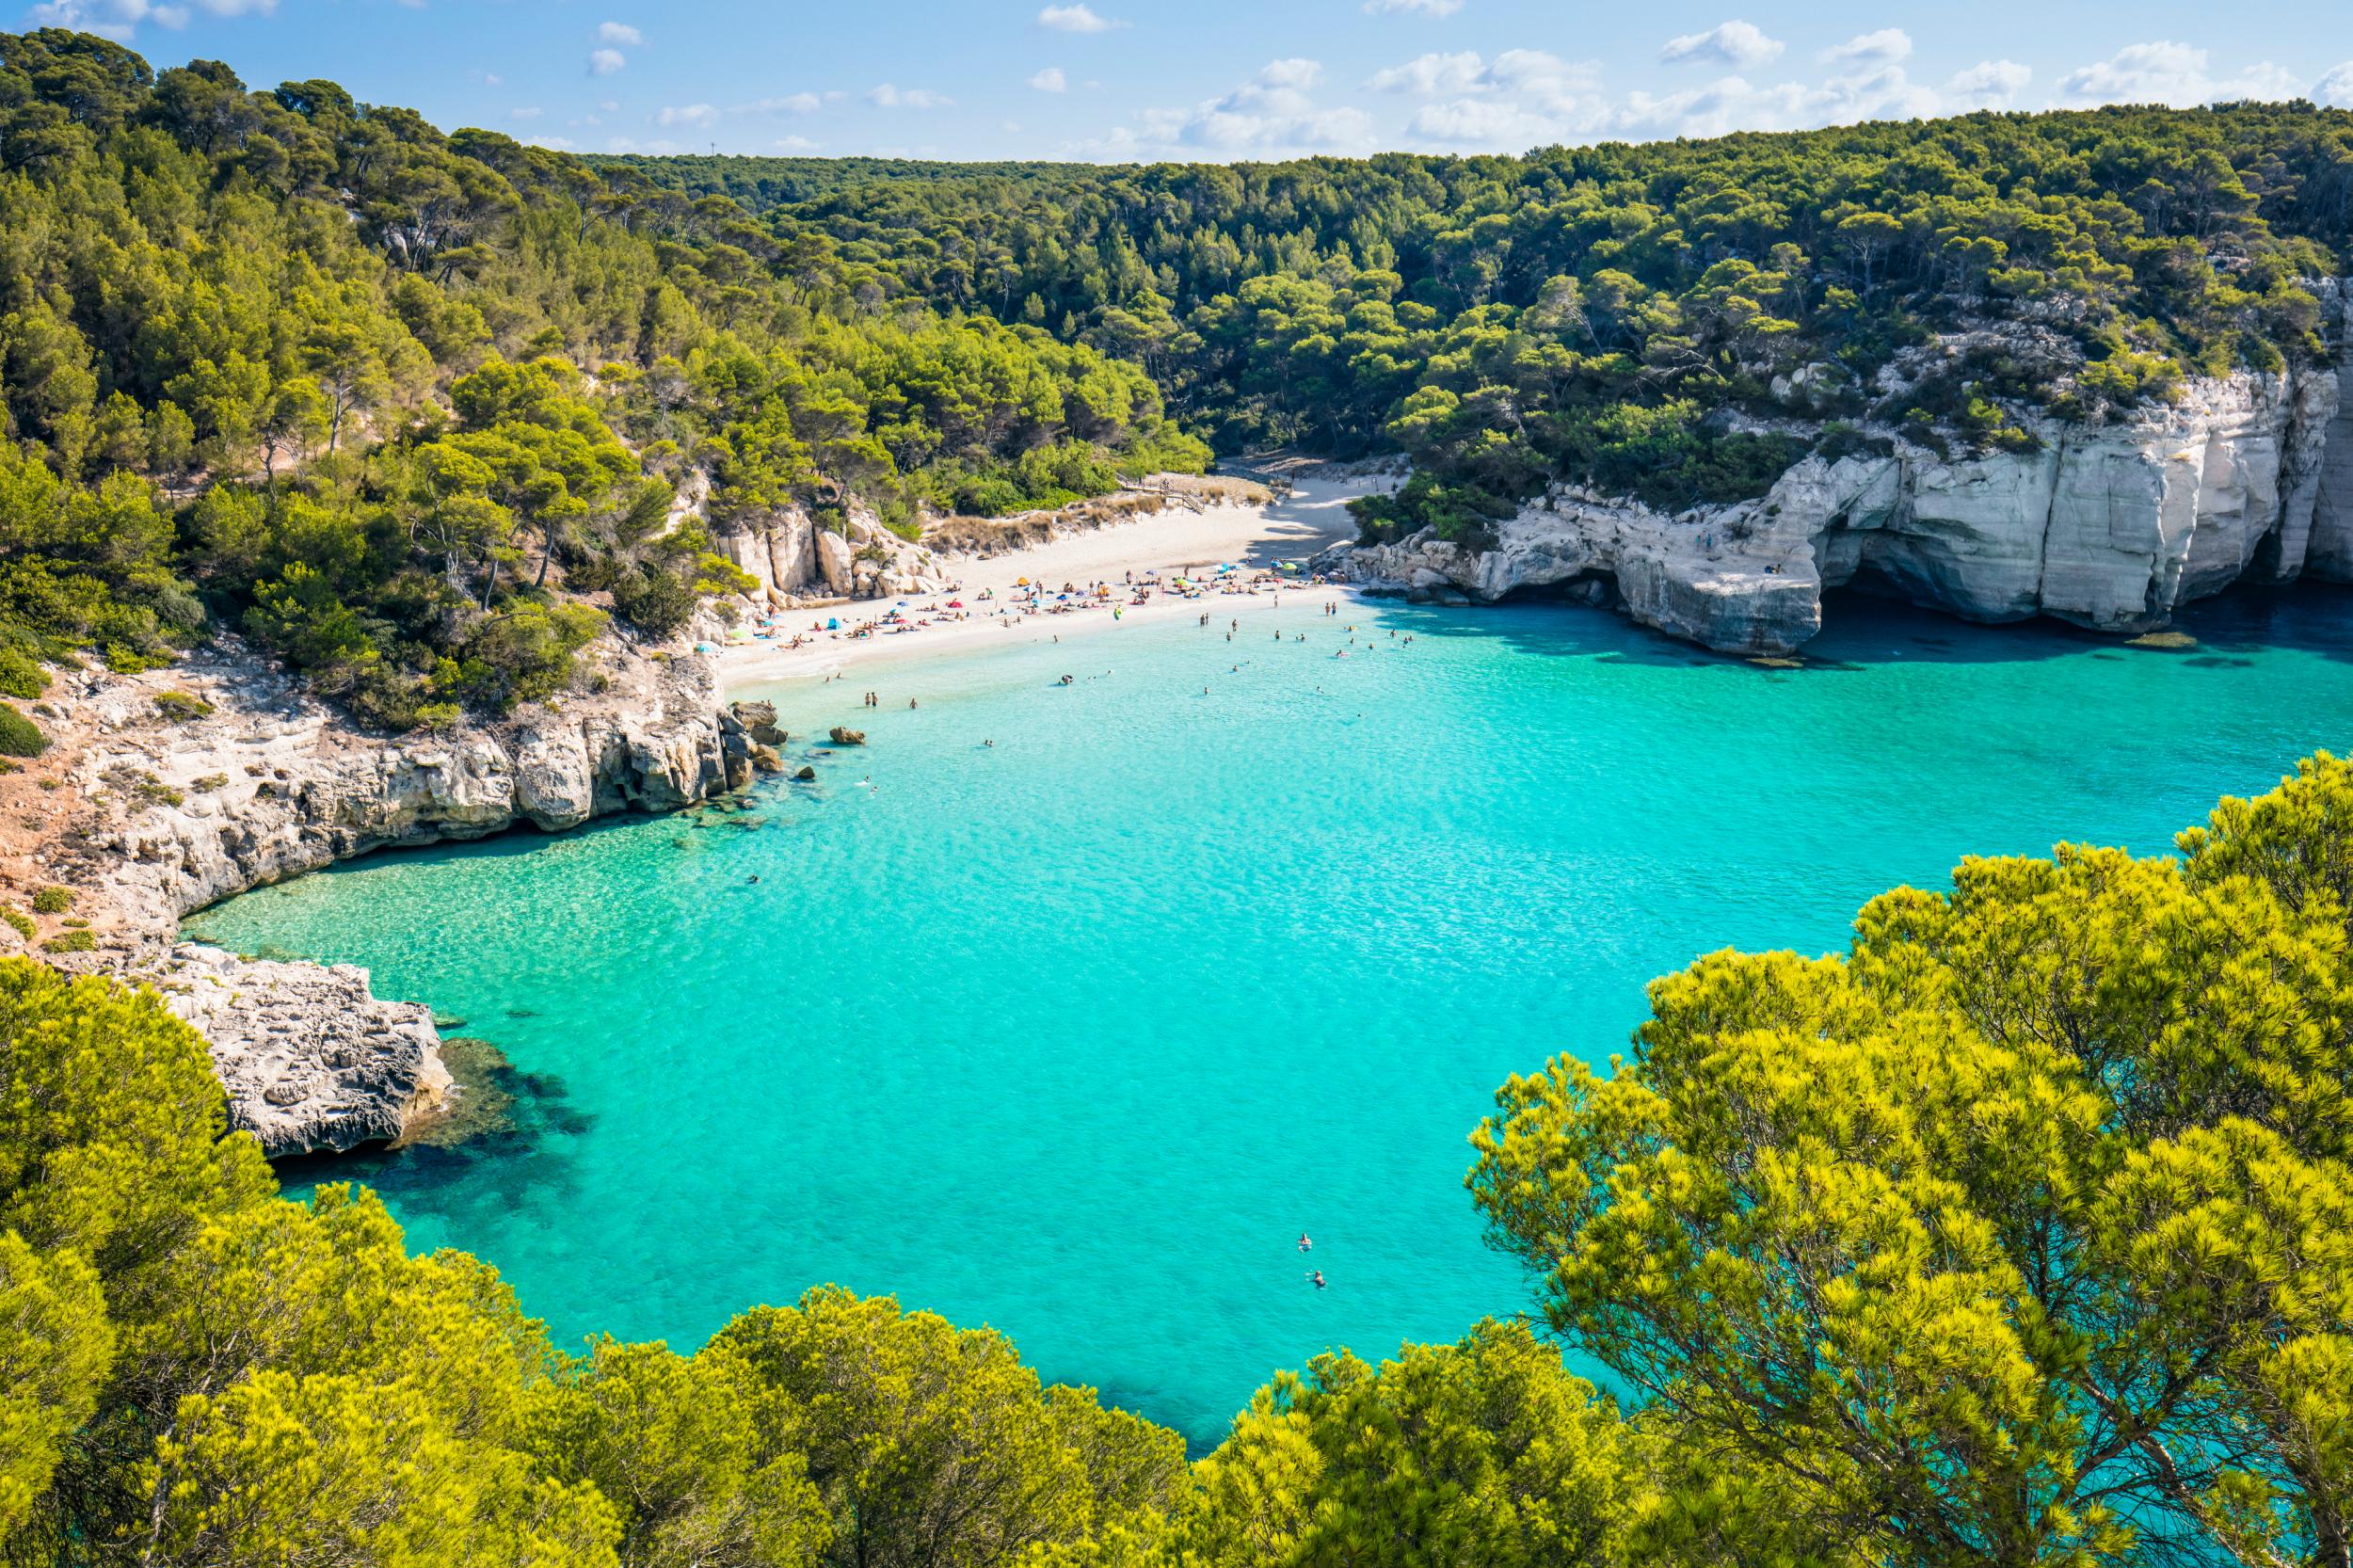 Take a dip in one of Menorca's idyllic coves